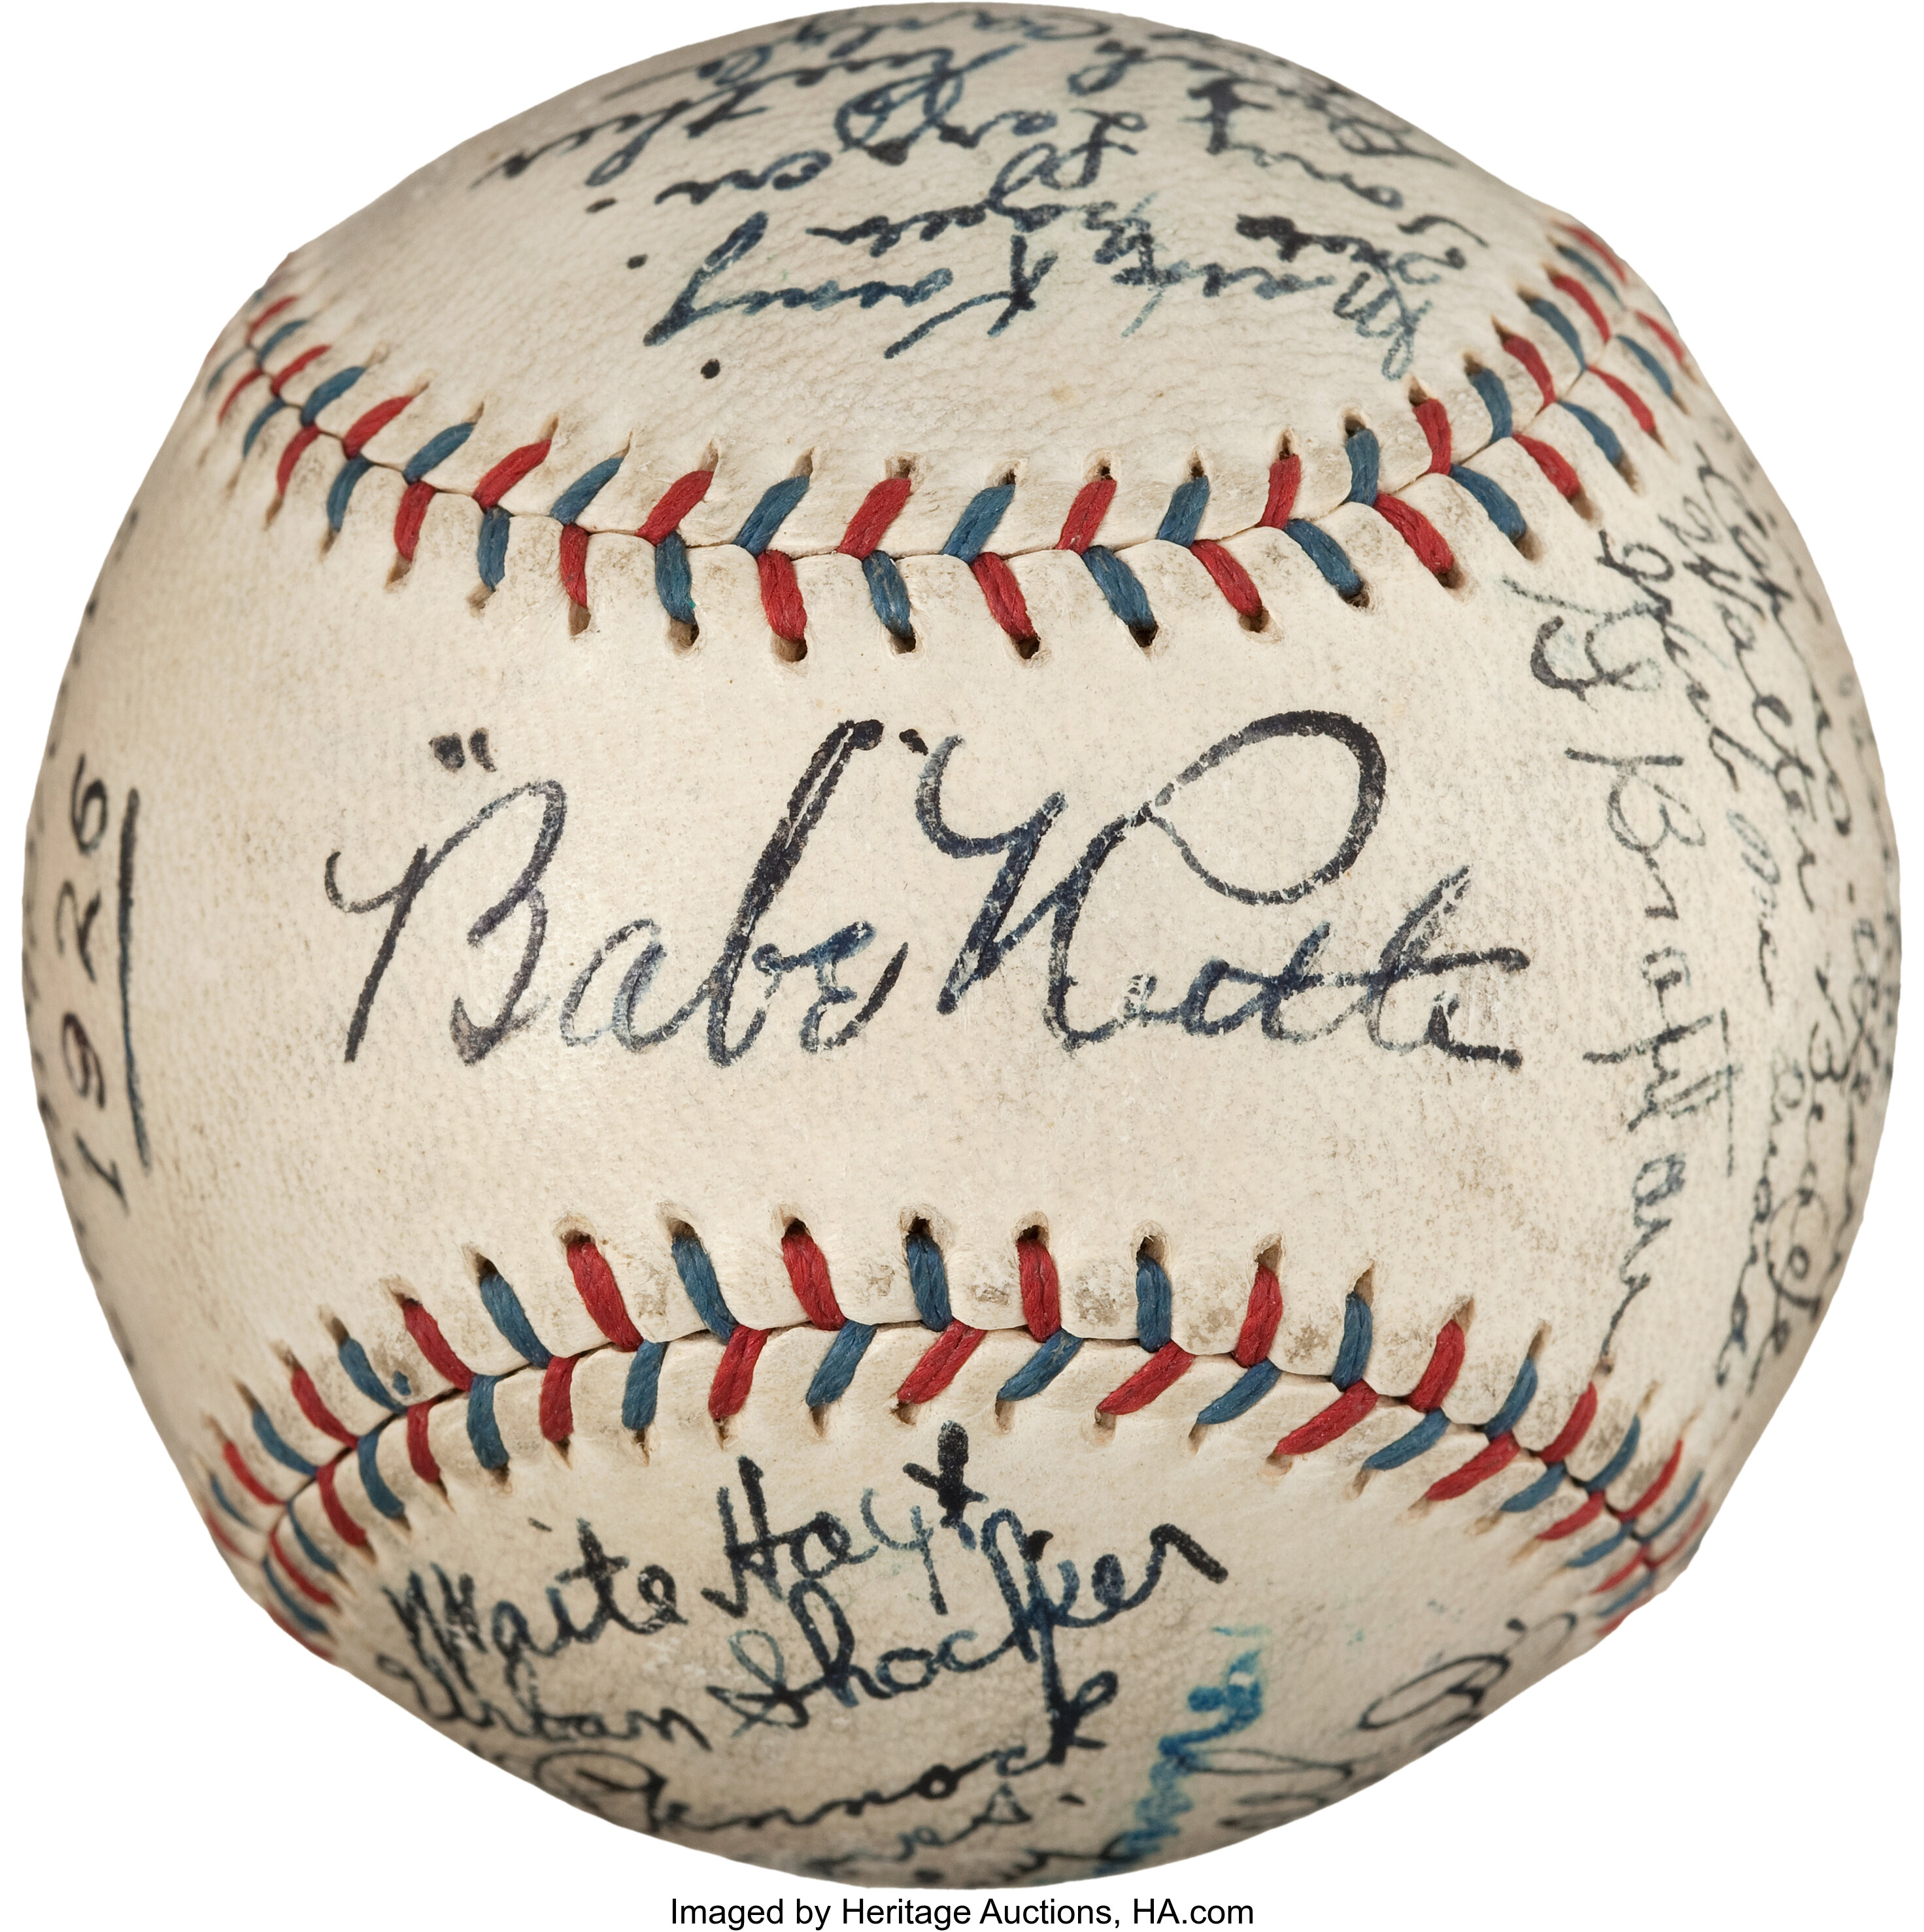 1926 New York Yankees Team Signed Baseball from The Lou Gehrig